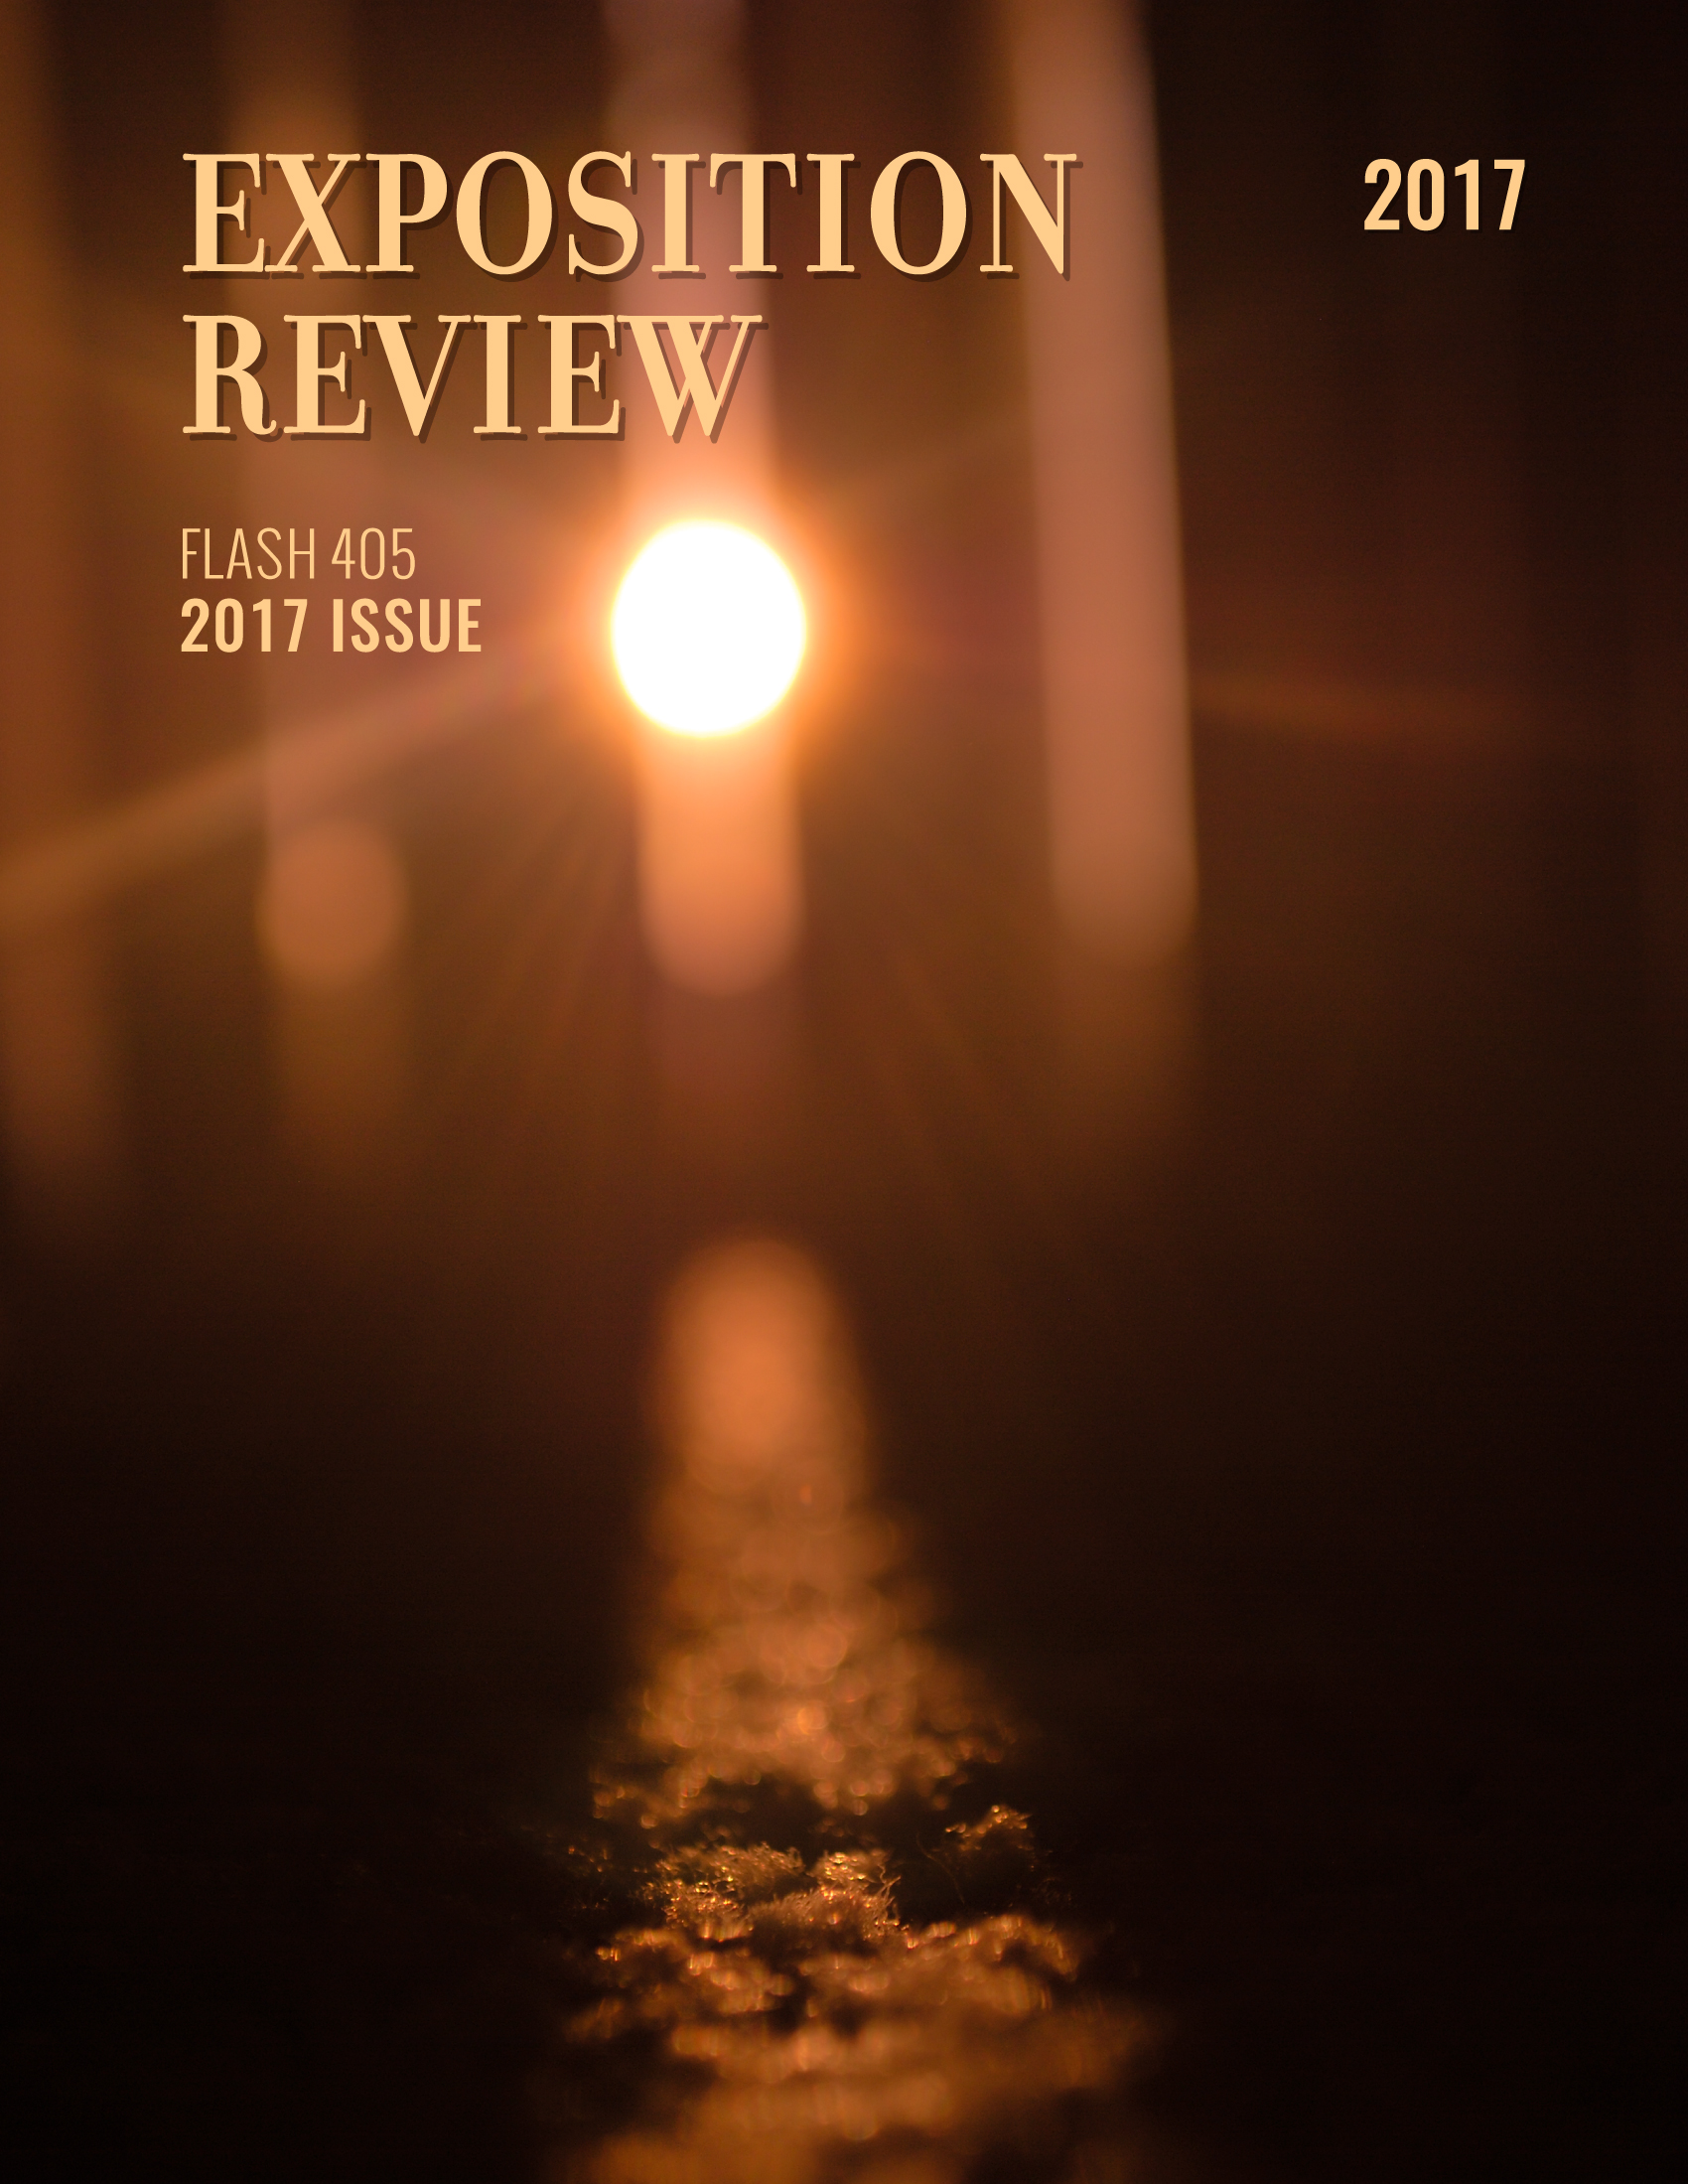 Exposition Review Flash 405 2017 Issue